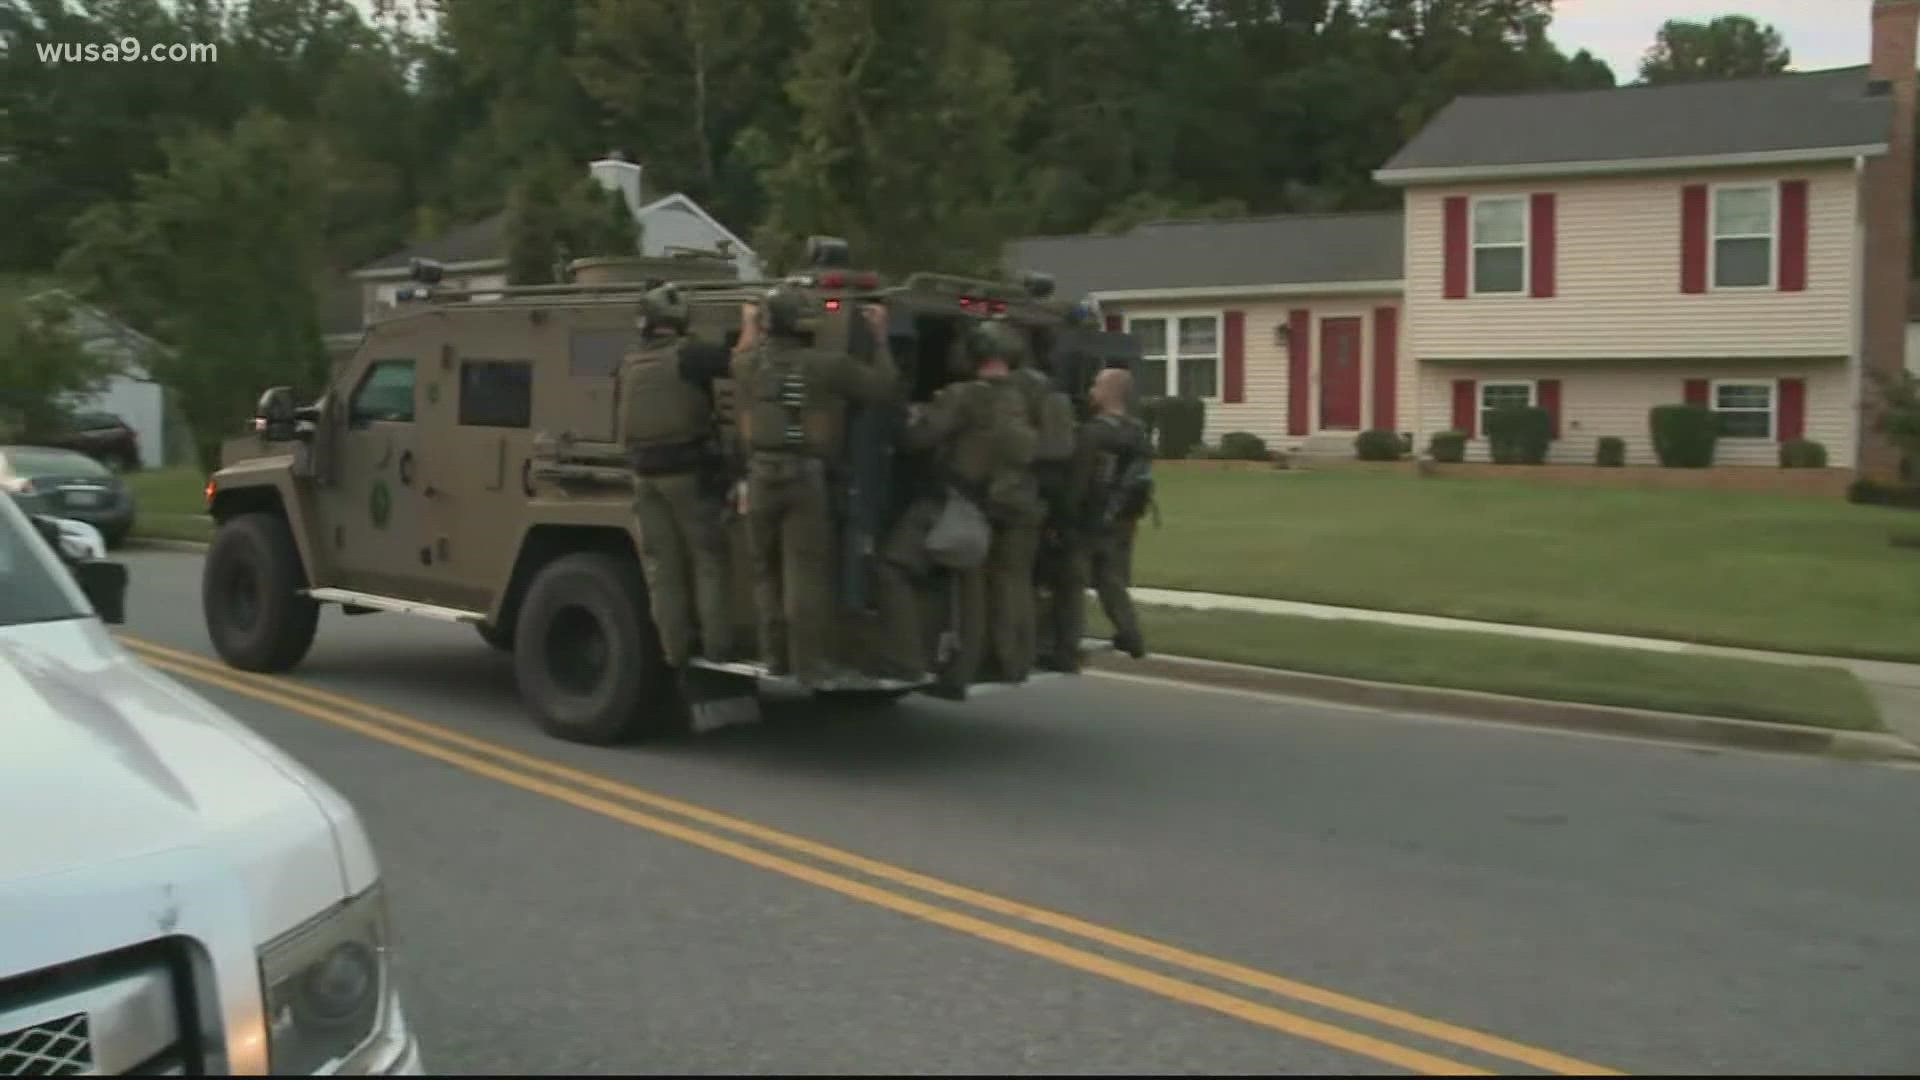 The man was taken into custody after an hours-long barricade situation on Cecily Court in Upper Marlboro, Maryland.